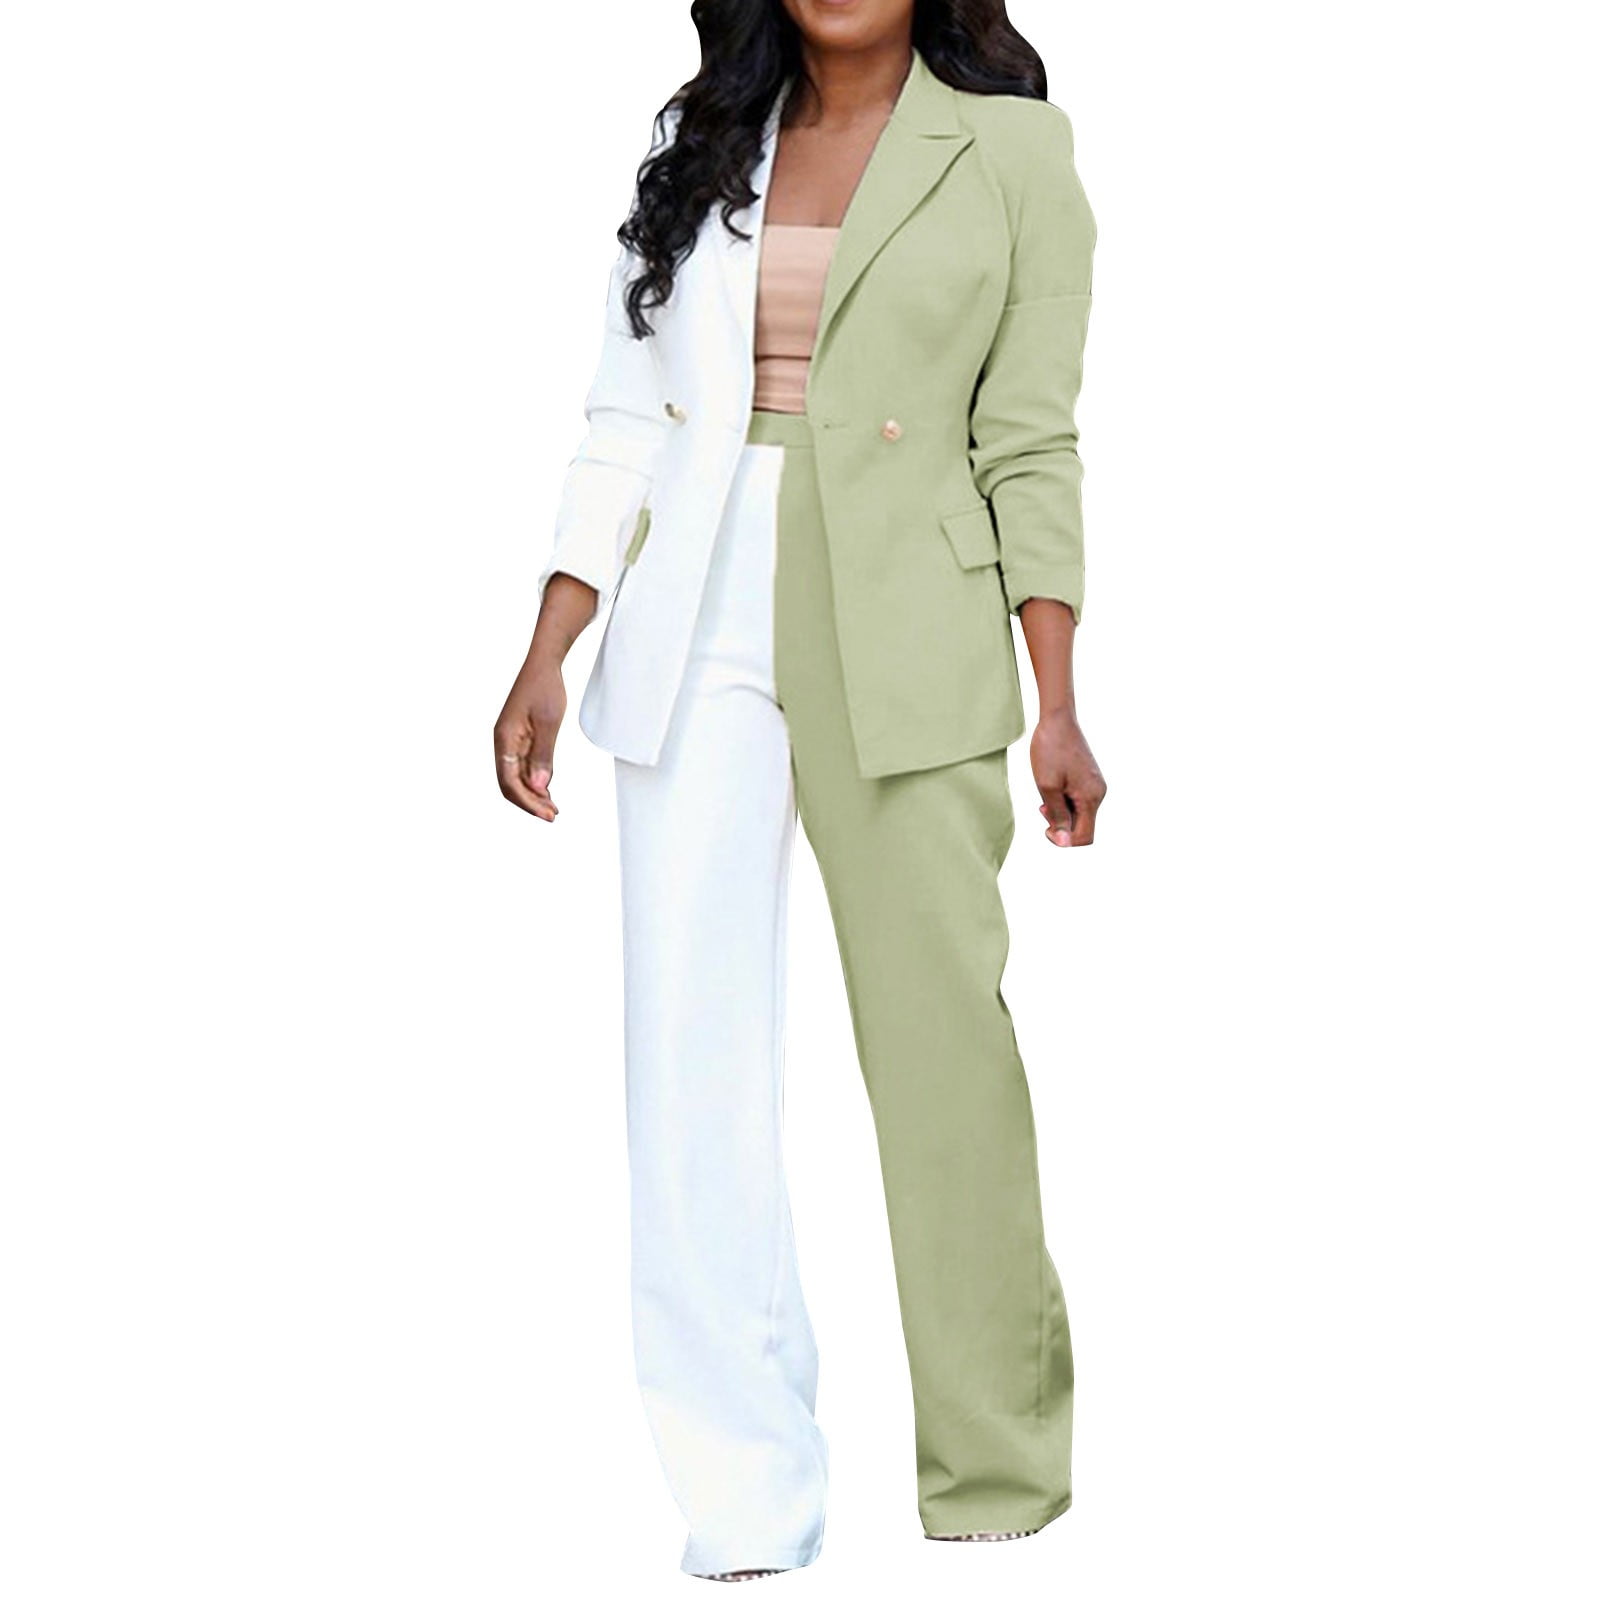 NKOOGH Wedding Pant Suits for Women Two Piece for Women Pants Suit